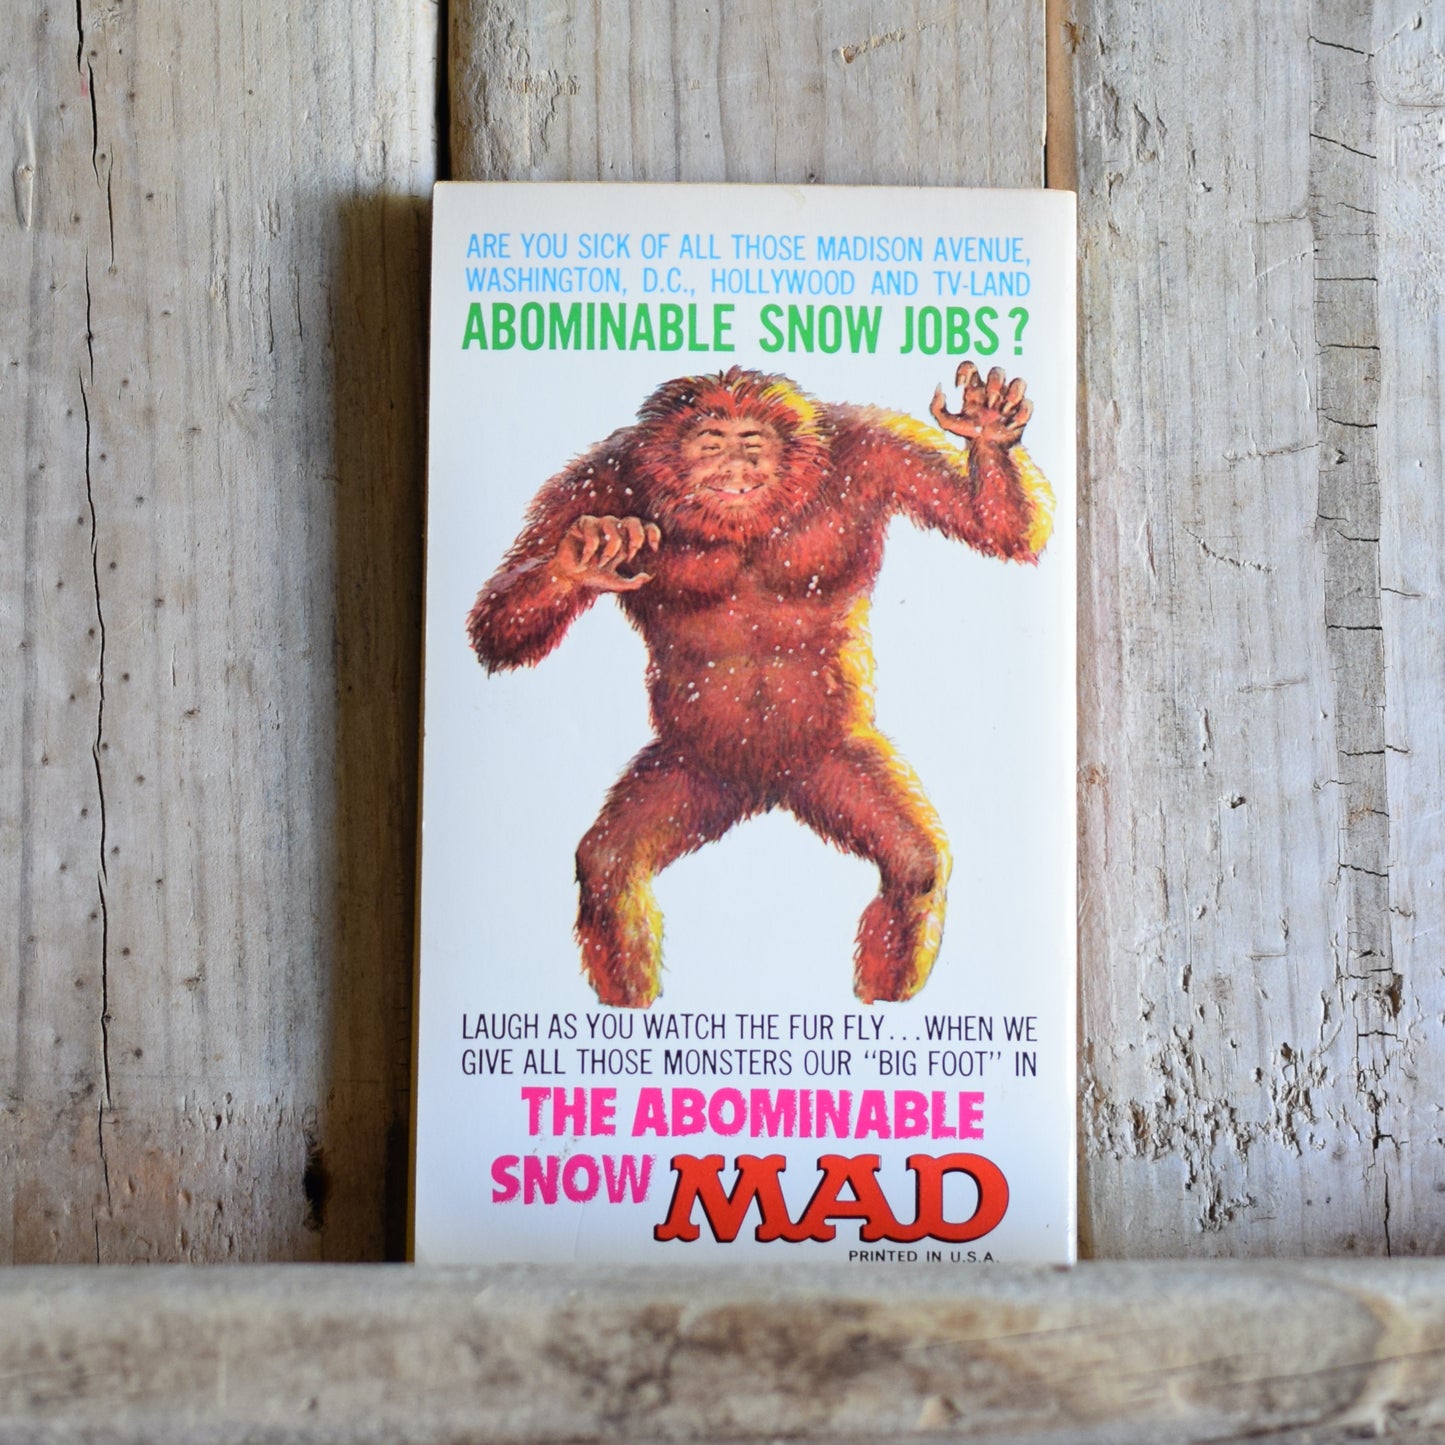 Vintage Fiction Paperback: The Abominable Snow MAD, Edited by Albert B Feldstein FIRST PRINTING